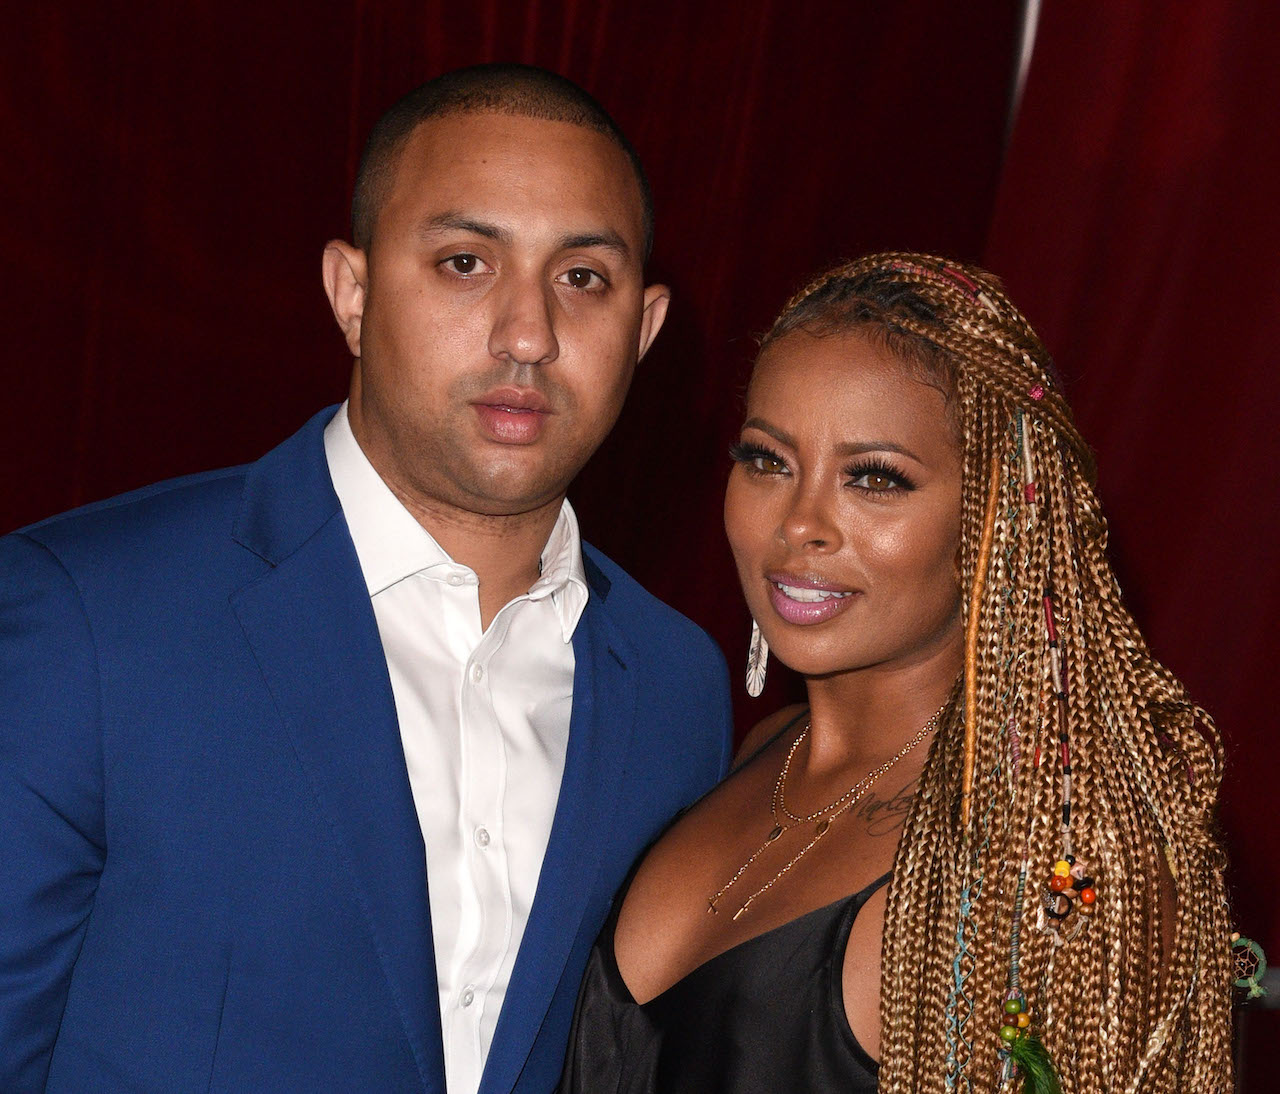 Michael Sterling and Eva Marcille pose for photo; Marcille filed for divorce after four years of marriage